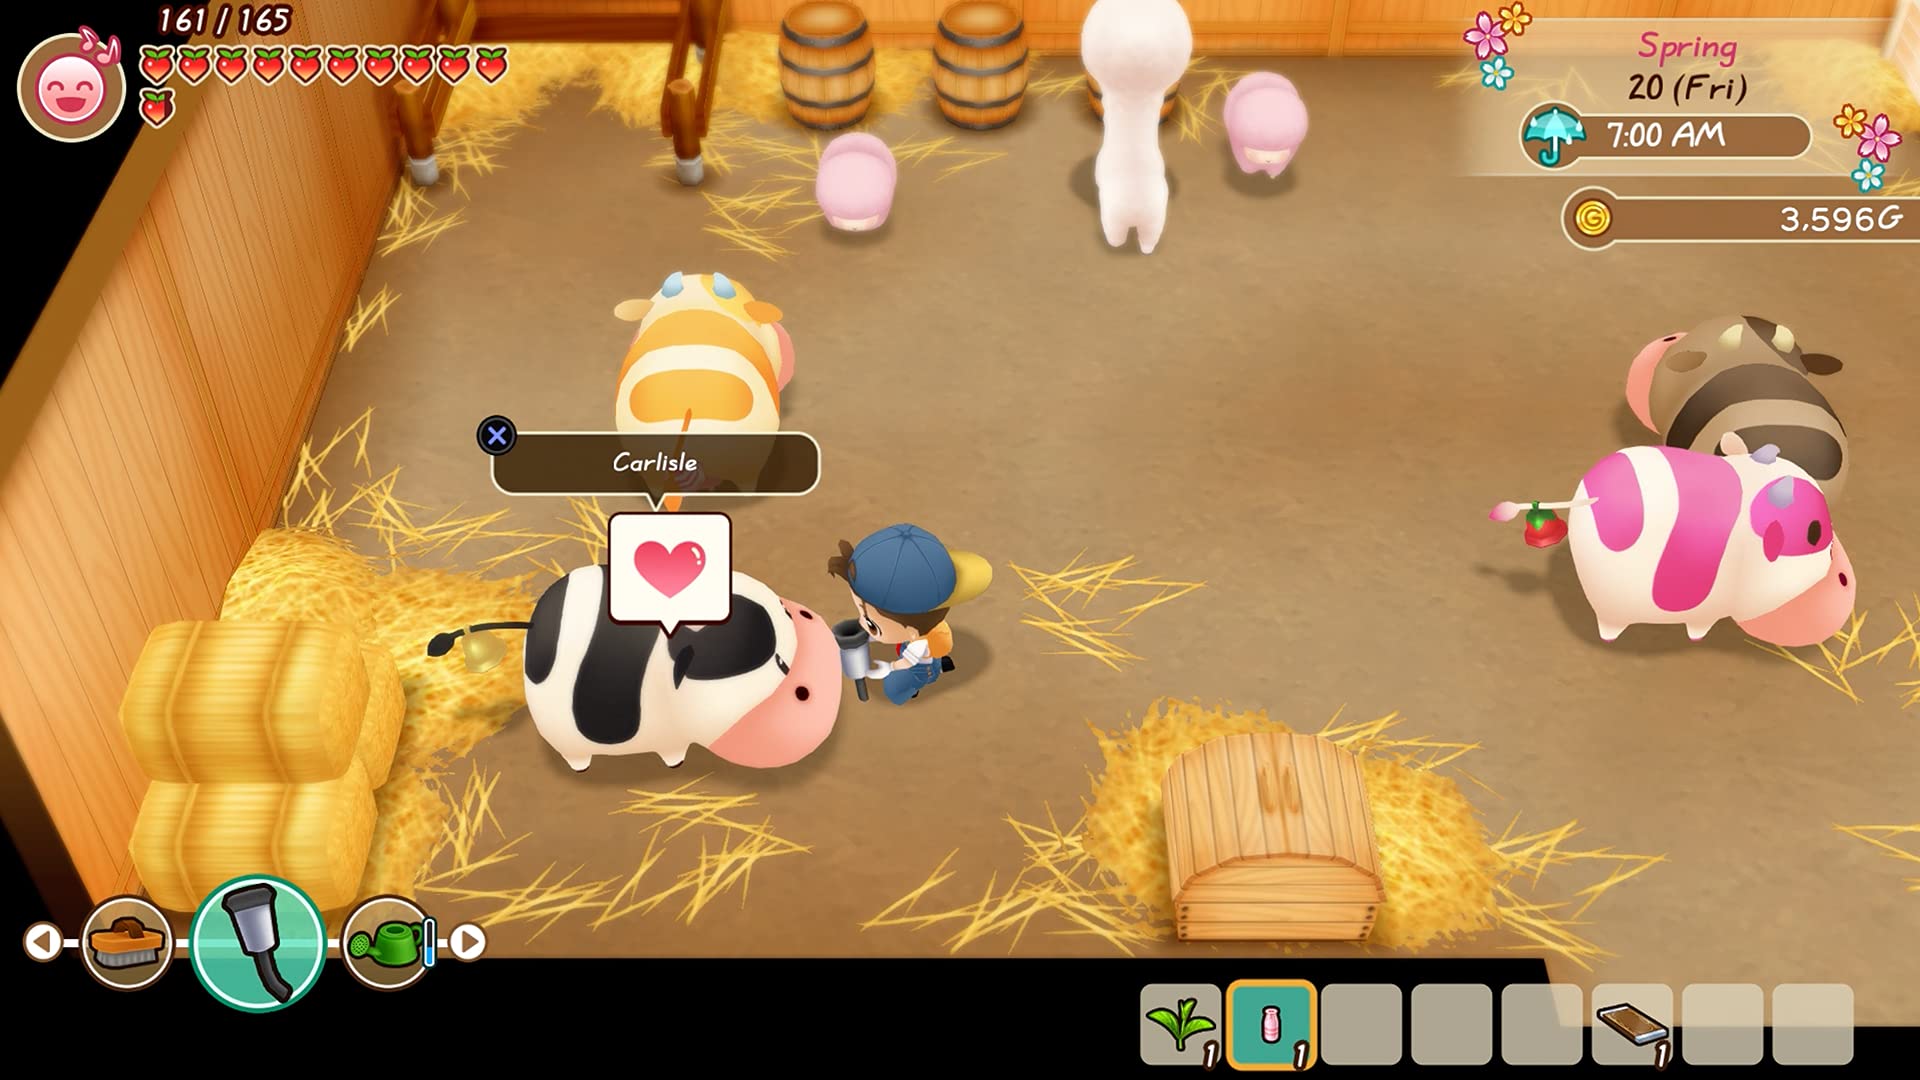 Story of Seasons: Friends of Mineral Town - PlayStation 4